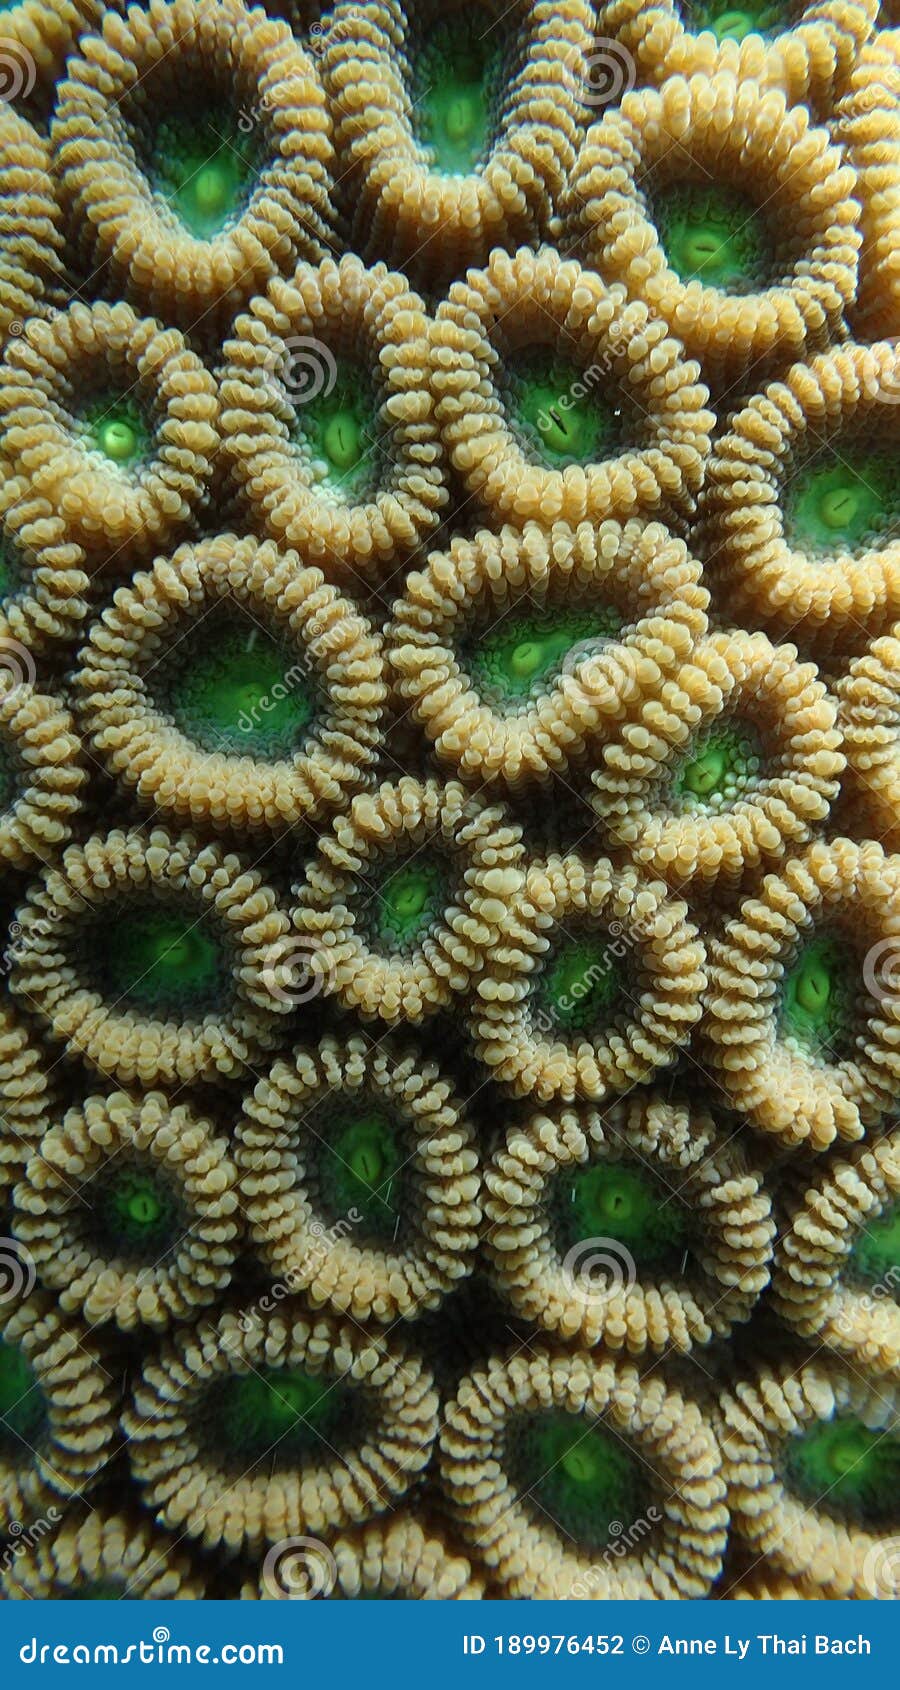 close view of coral polyps of scleractinian hard coral, wall corallites separated